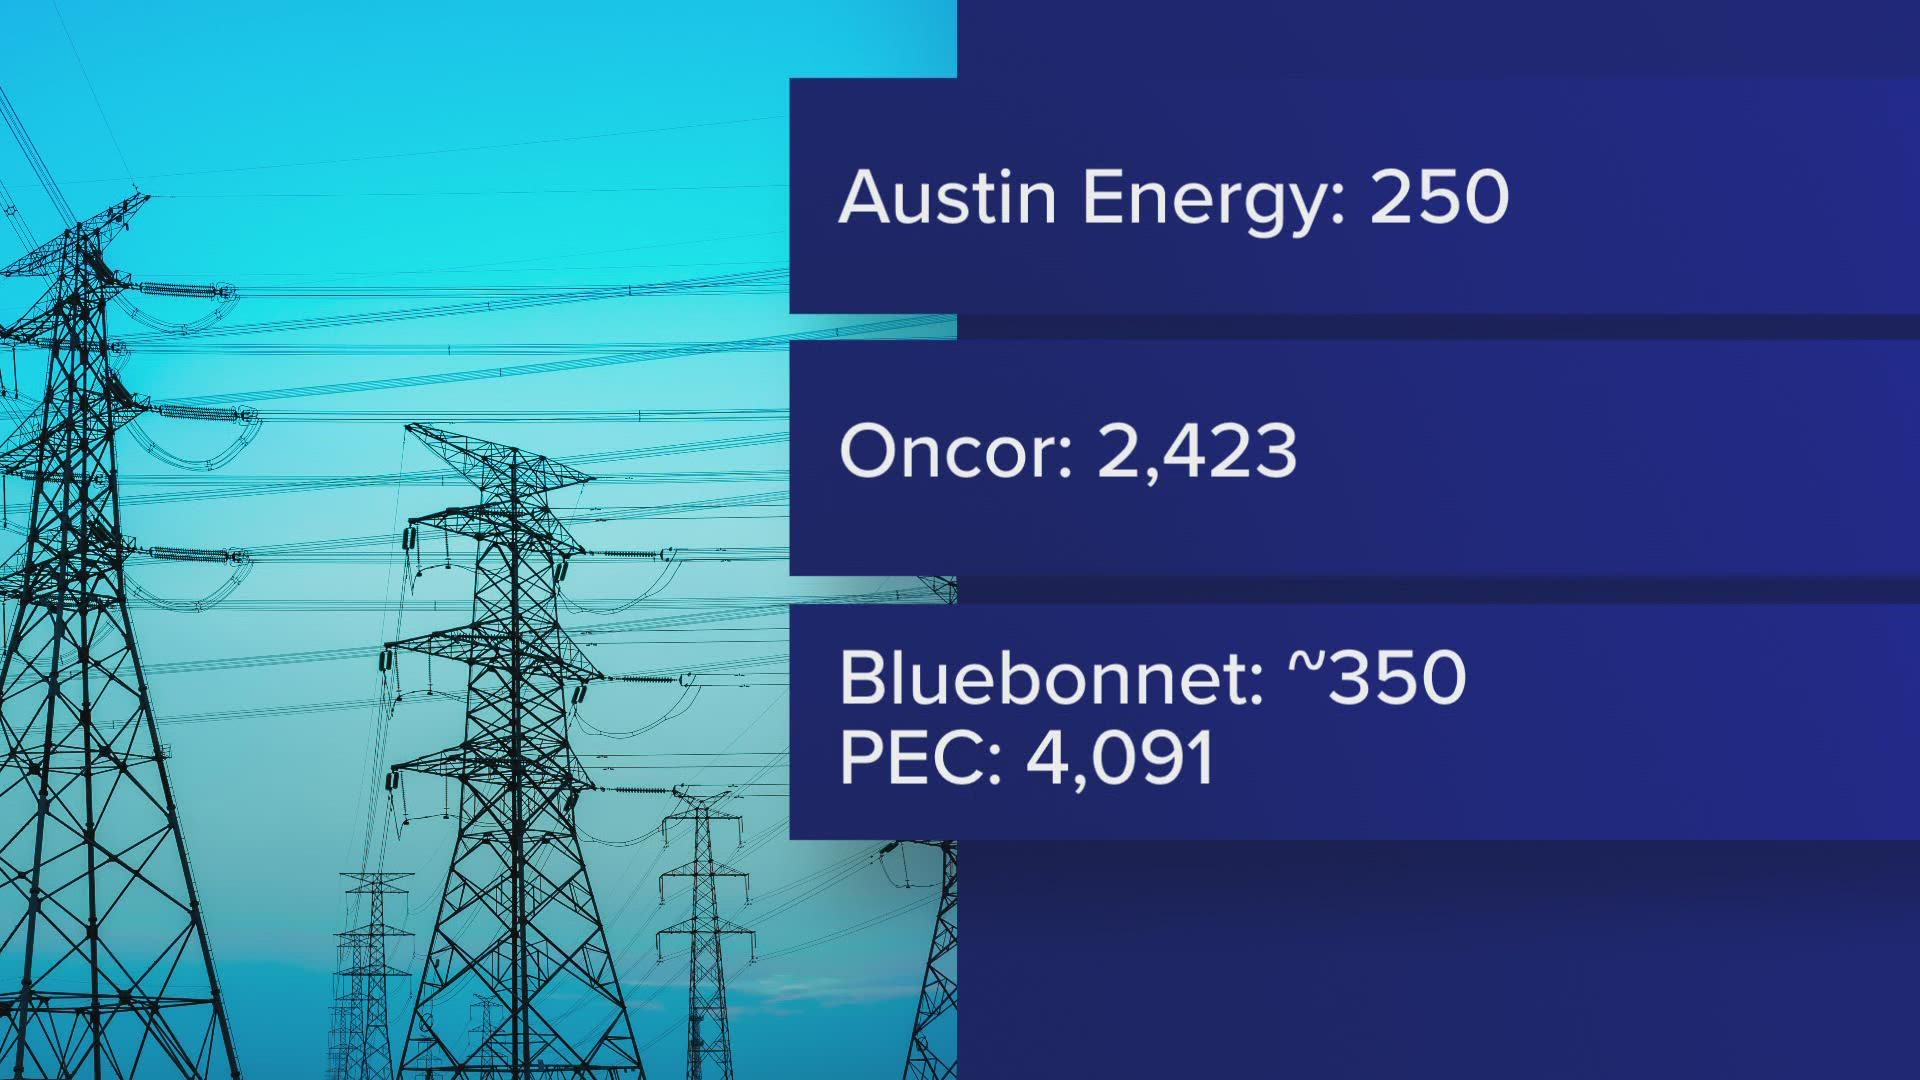 While Texas leaders say the grid is holding up well, localized outages are still possible due to strong winds.